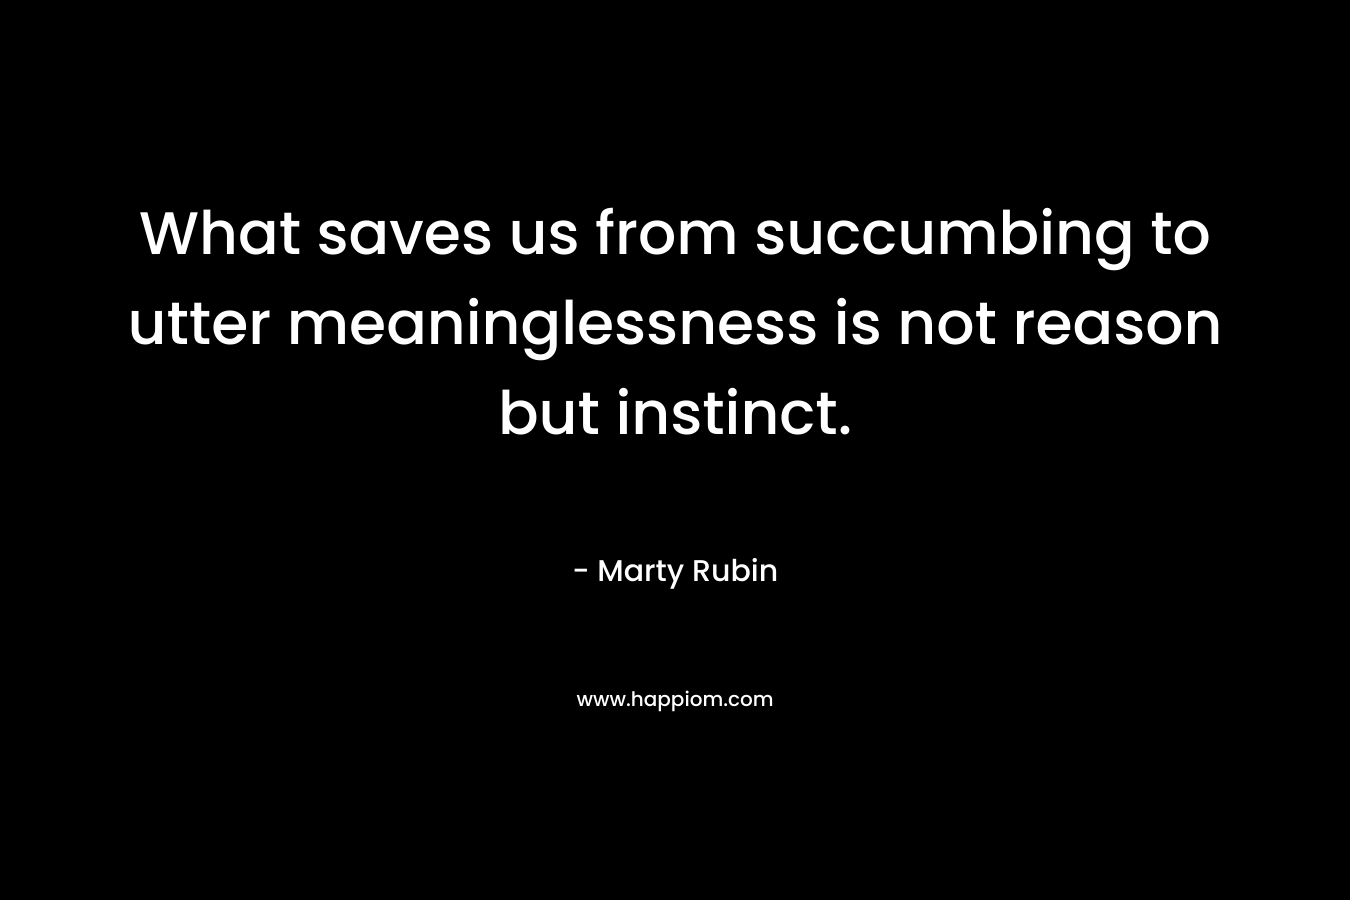 What saves us from succumbing to utter meaninglessness is not reason but instinct. – Marty Rubin